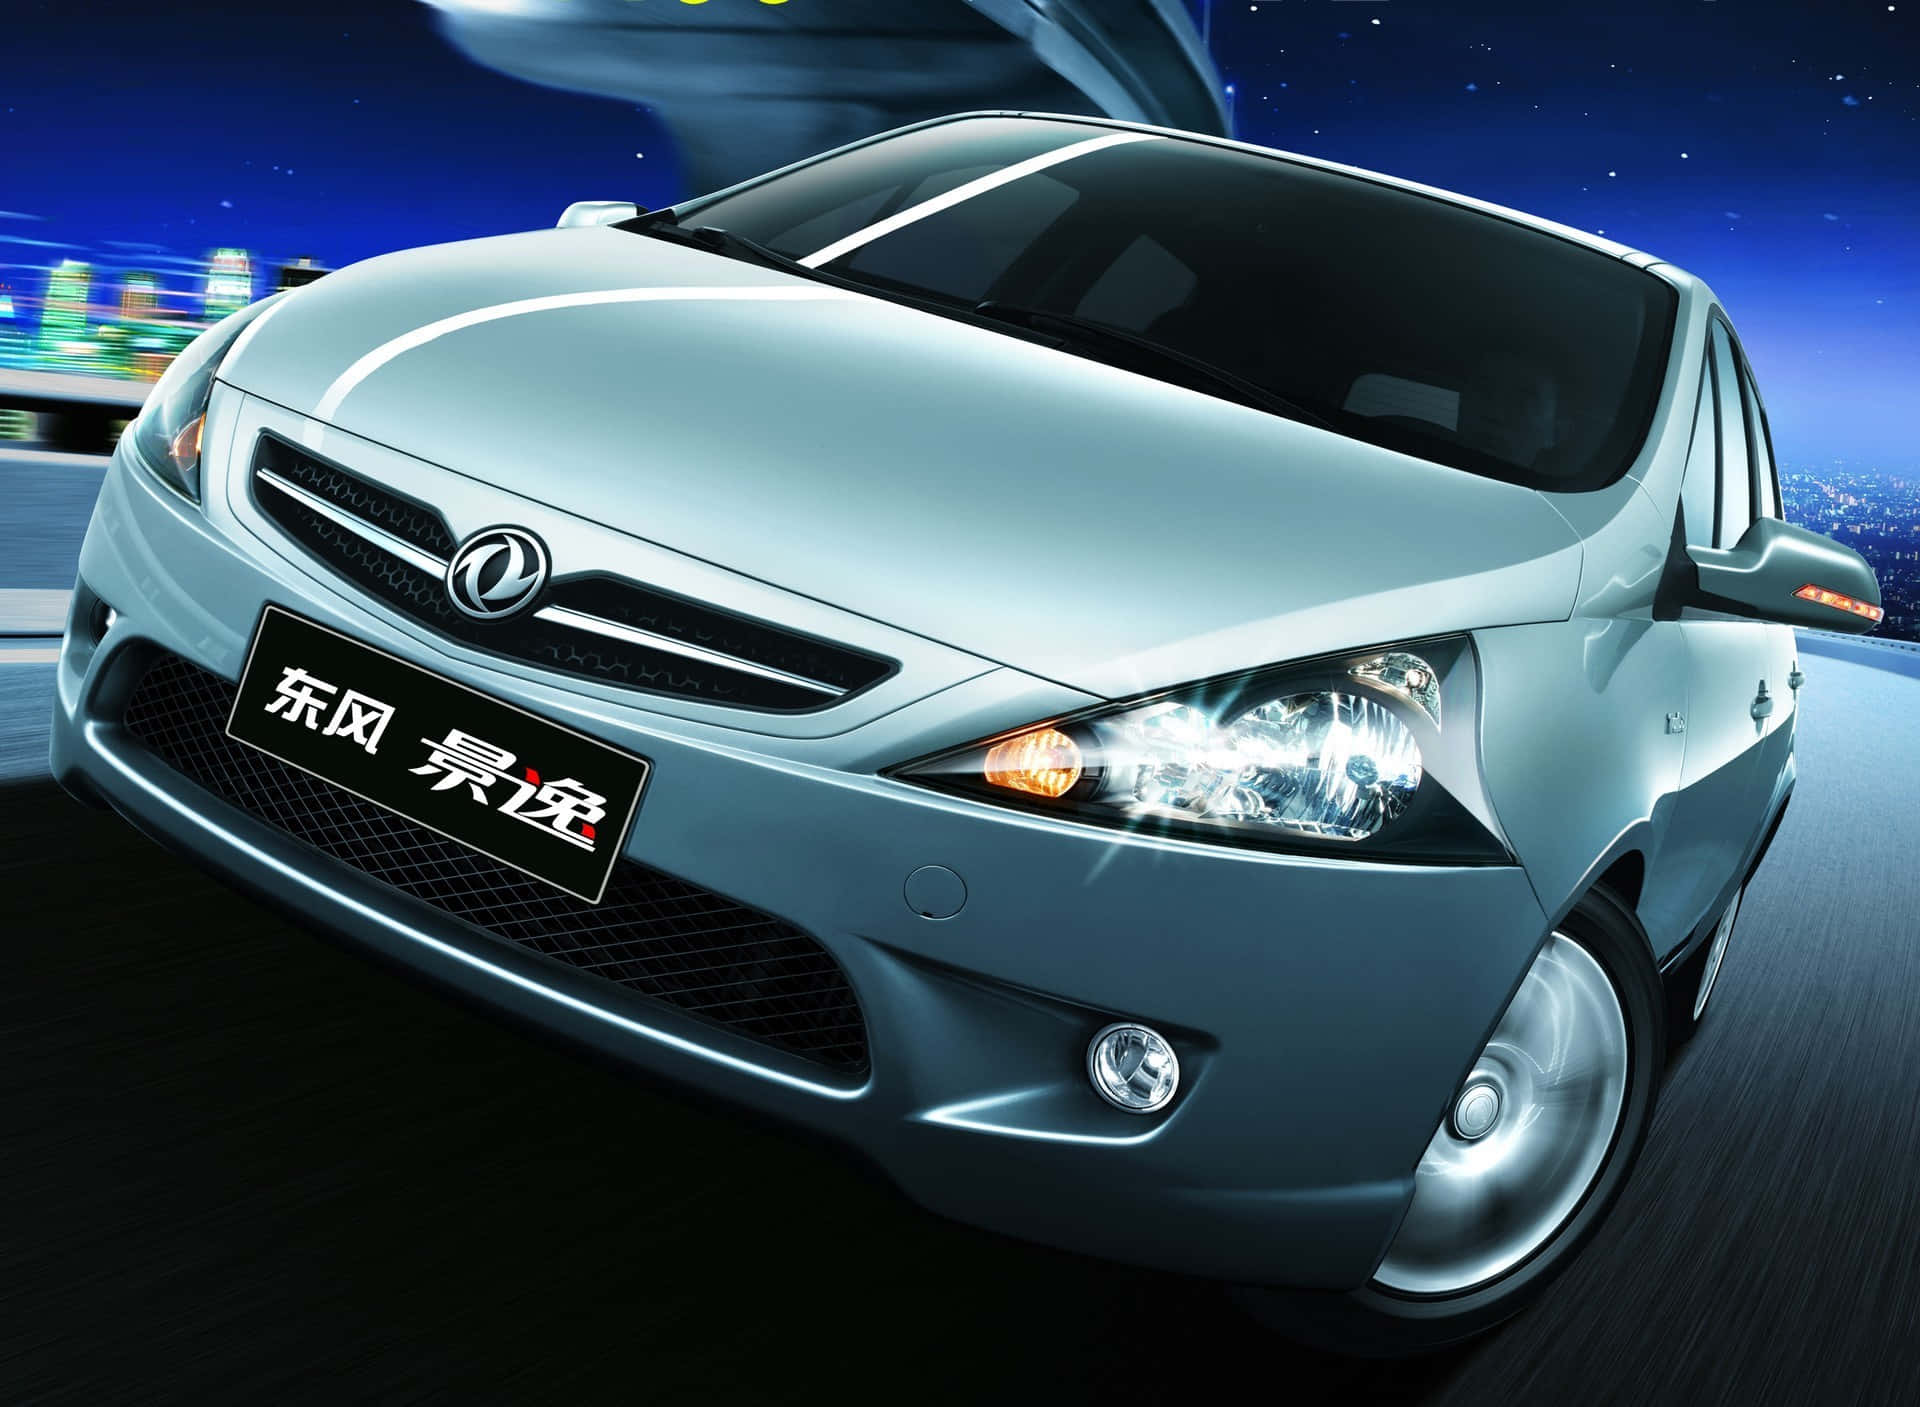 Dongfeng Motor Corporation's impressively designed vehicle showcased at an event Wallpaper